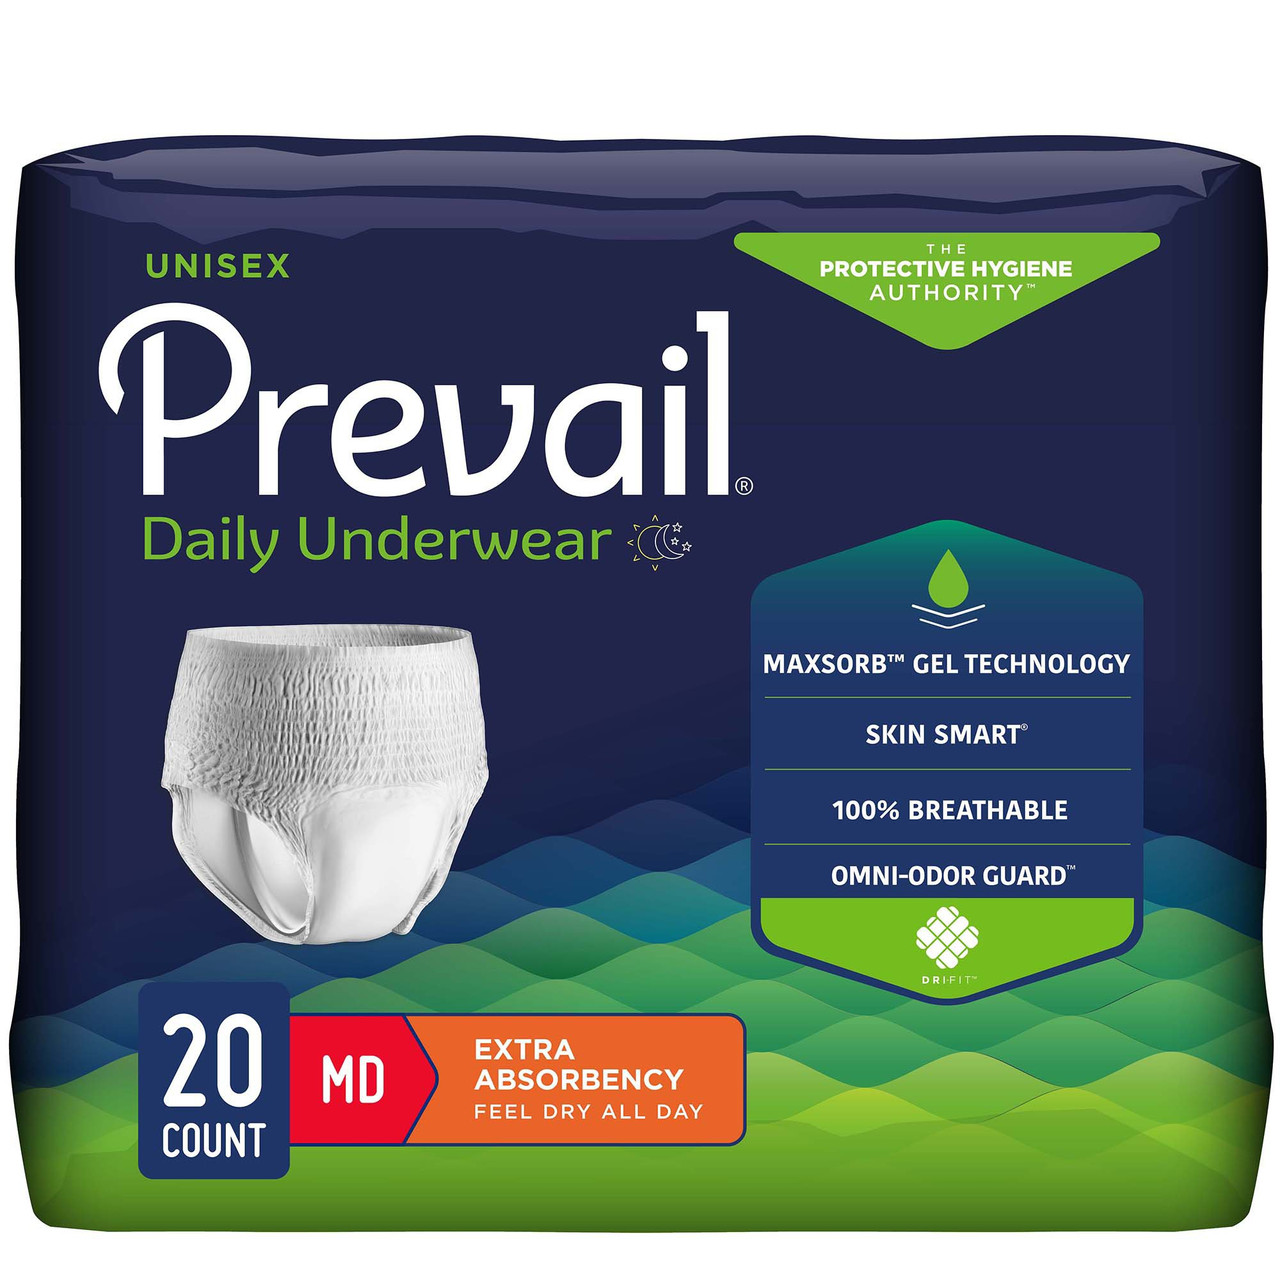 Prevail Extra Absorbency Adult Pull-Ups PV 514 PV511 PV511 PV512